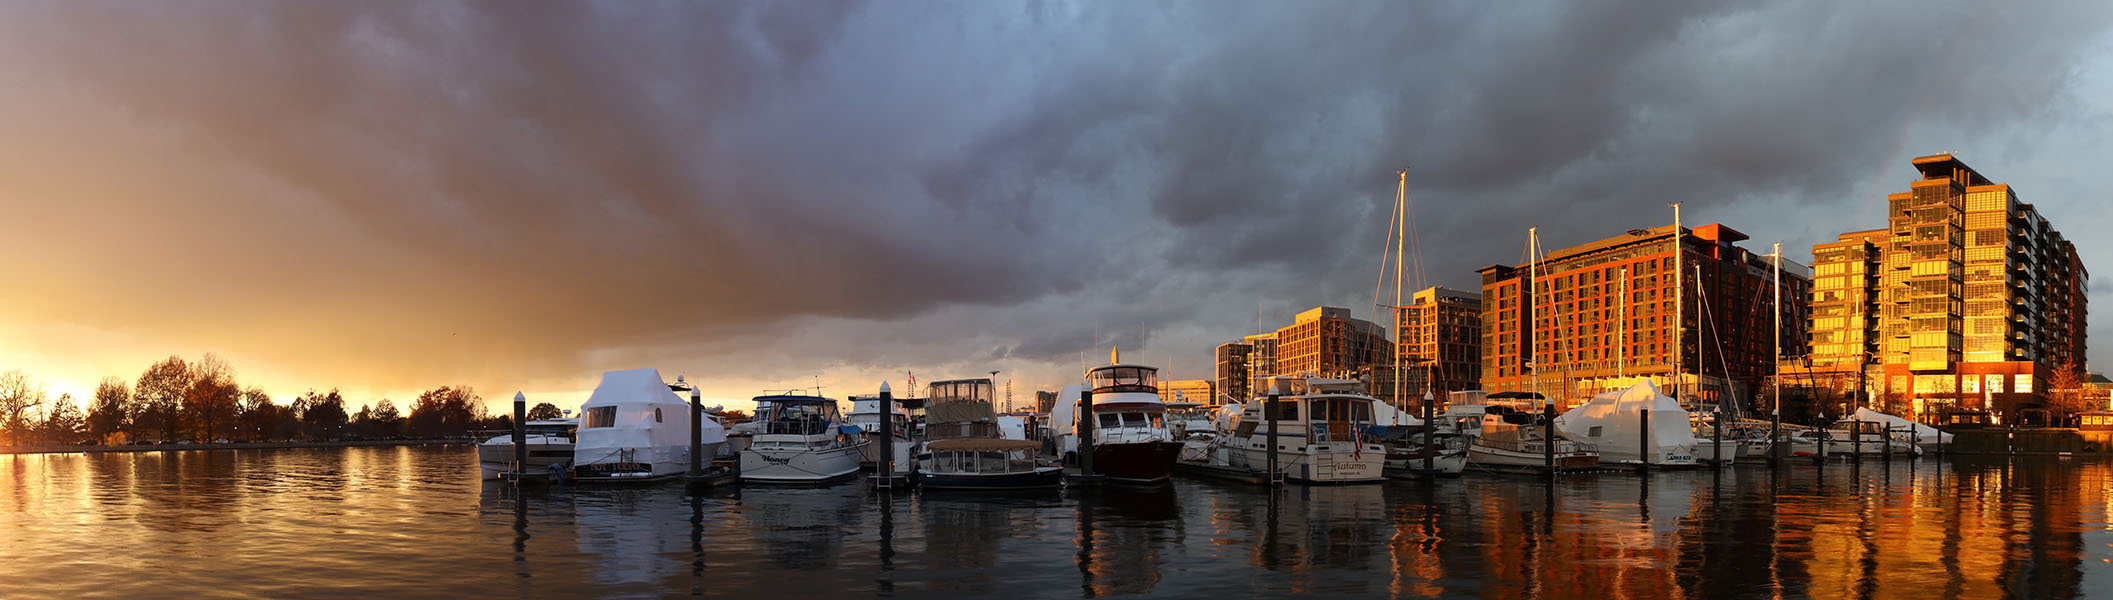 Panorama of Marina and Buildings in Gold and Red Sunset Light.